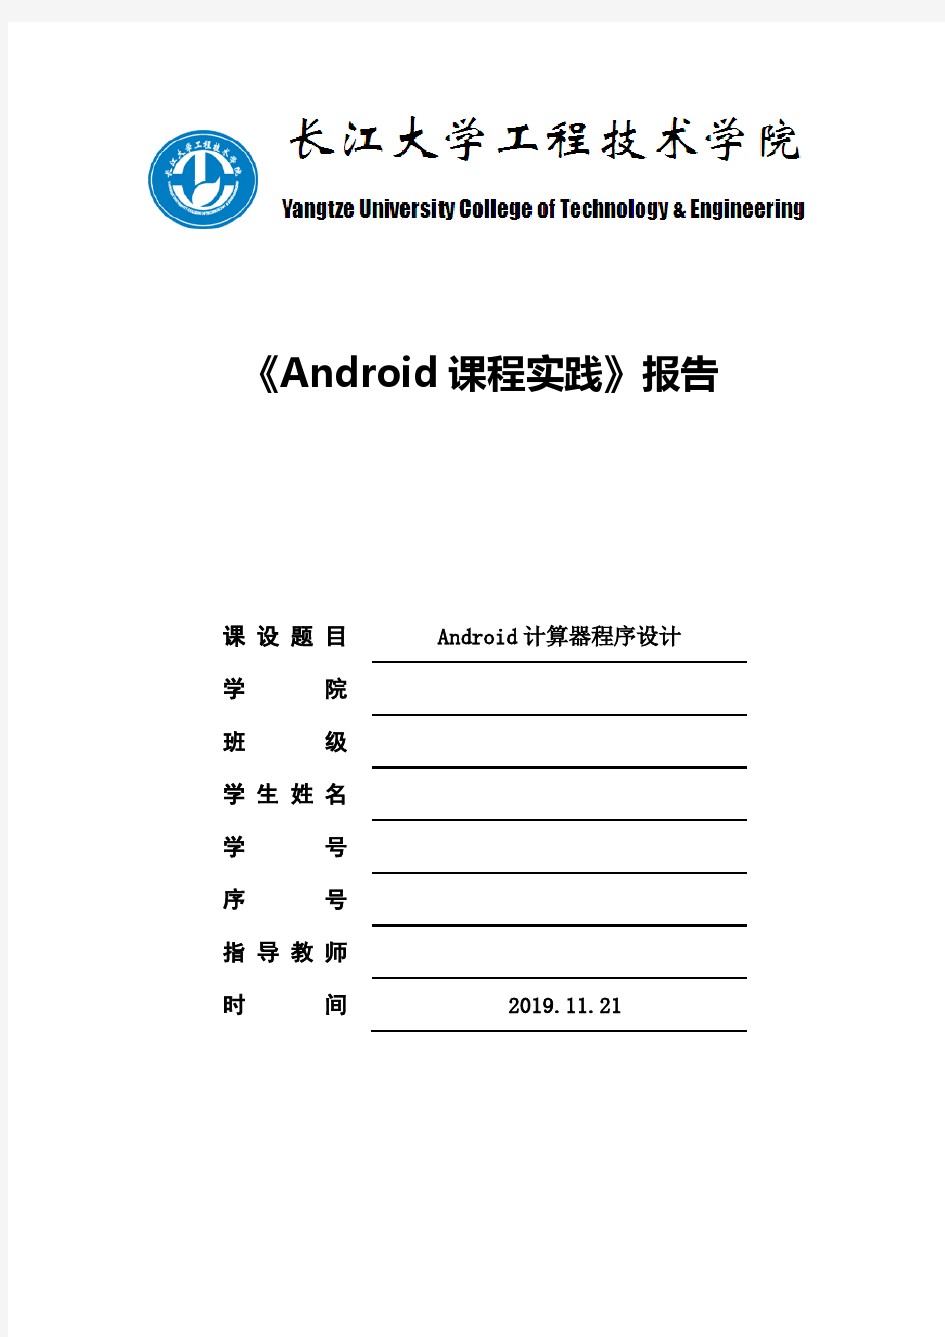 Android计算器设计报告